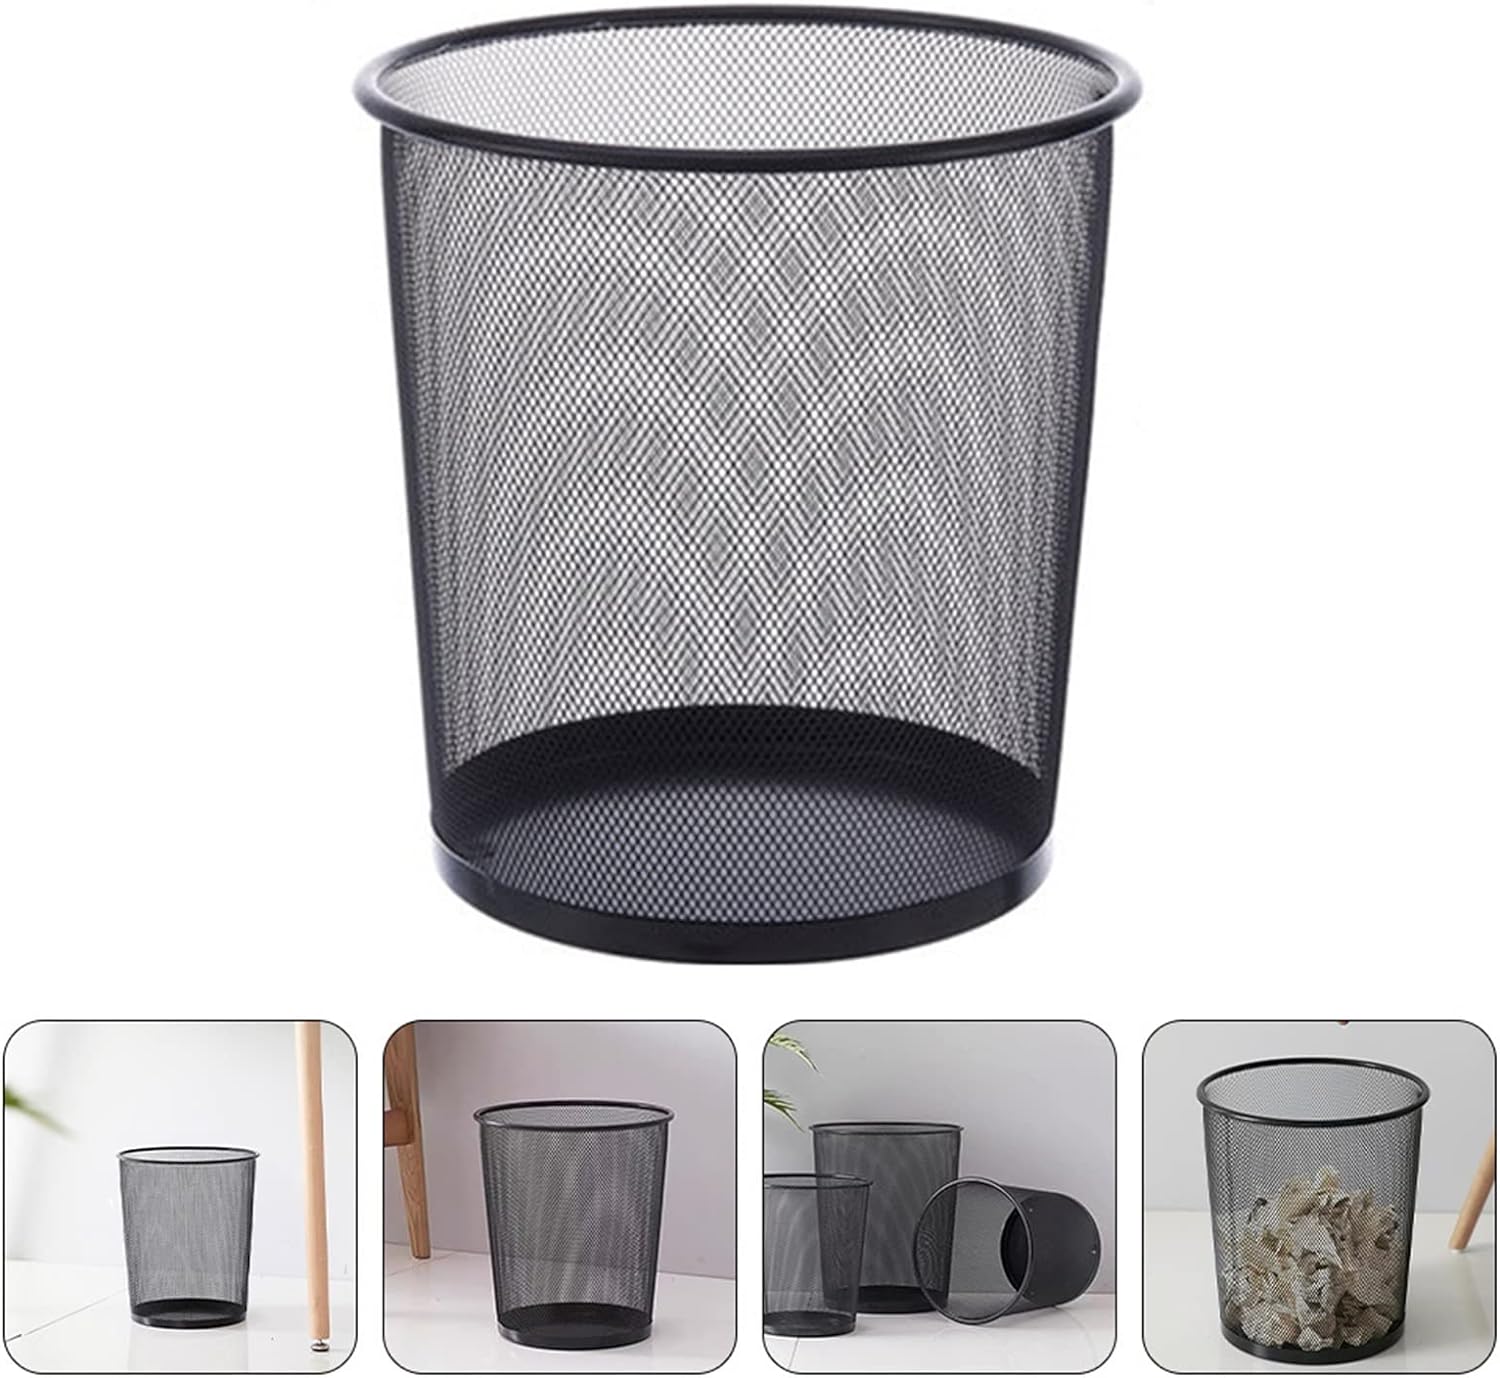 Black stainless steel mesh trash can